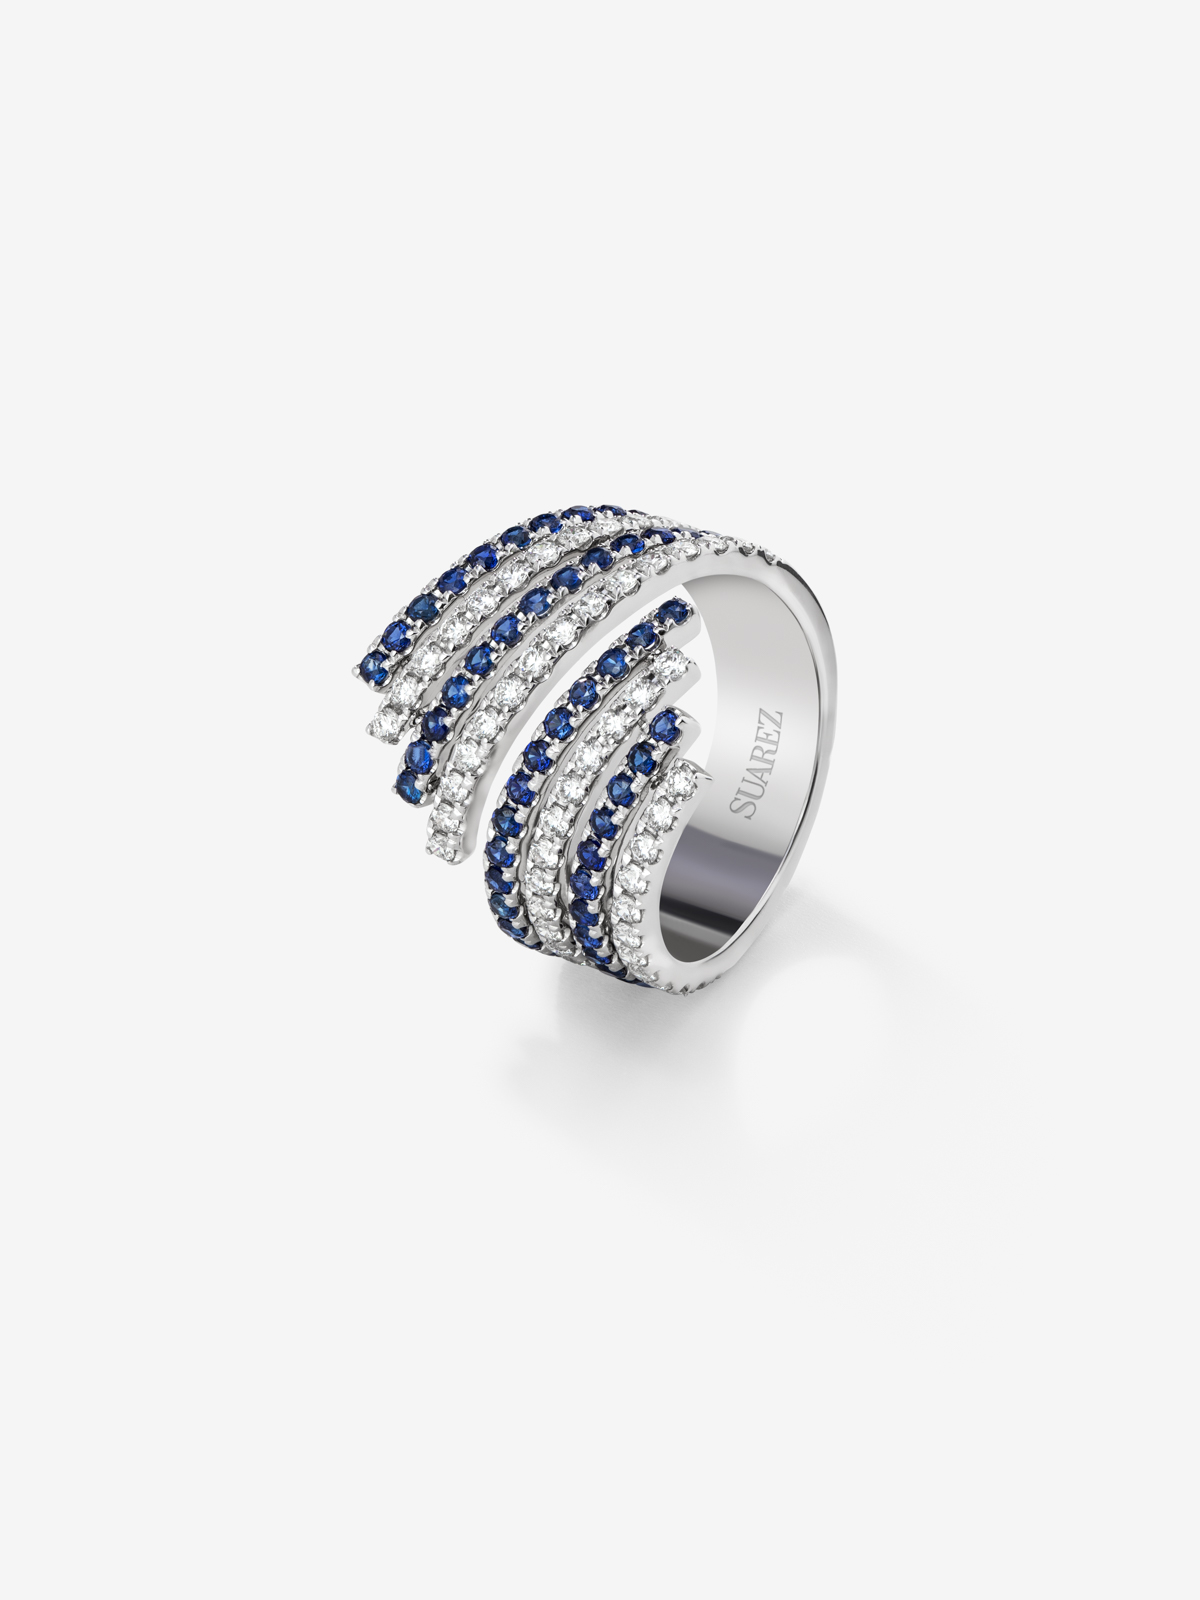 18K White Gold Ring with Diamond and Sapphire